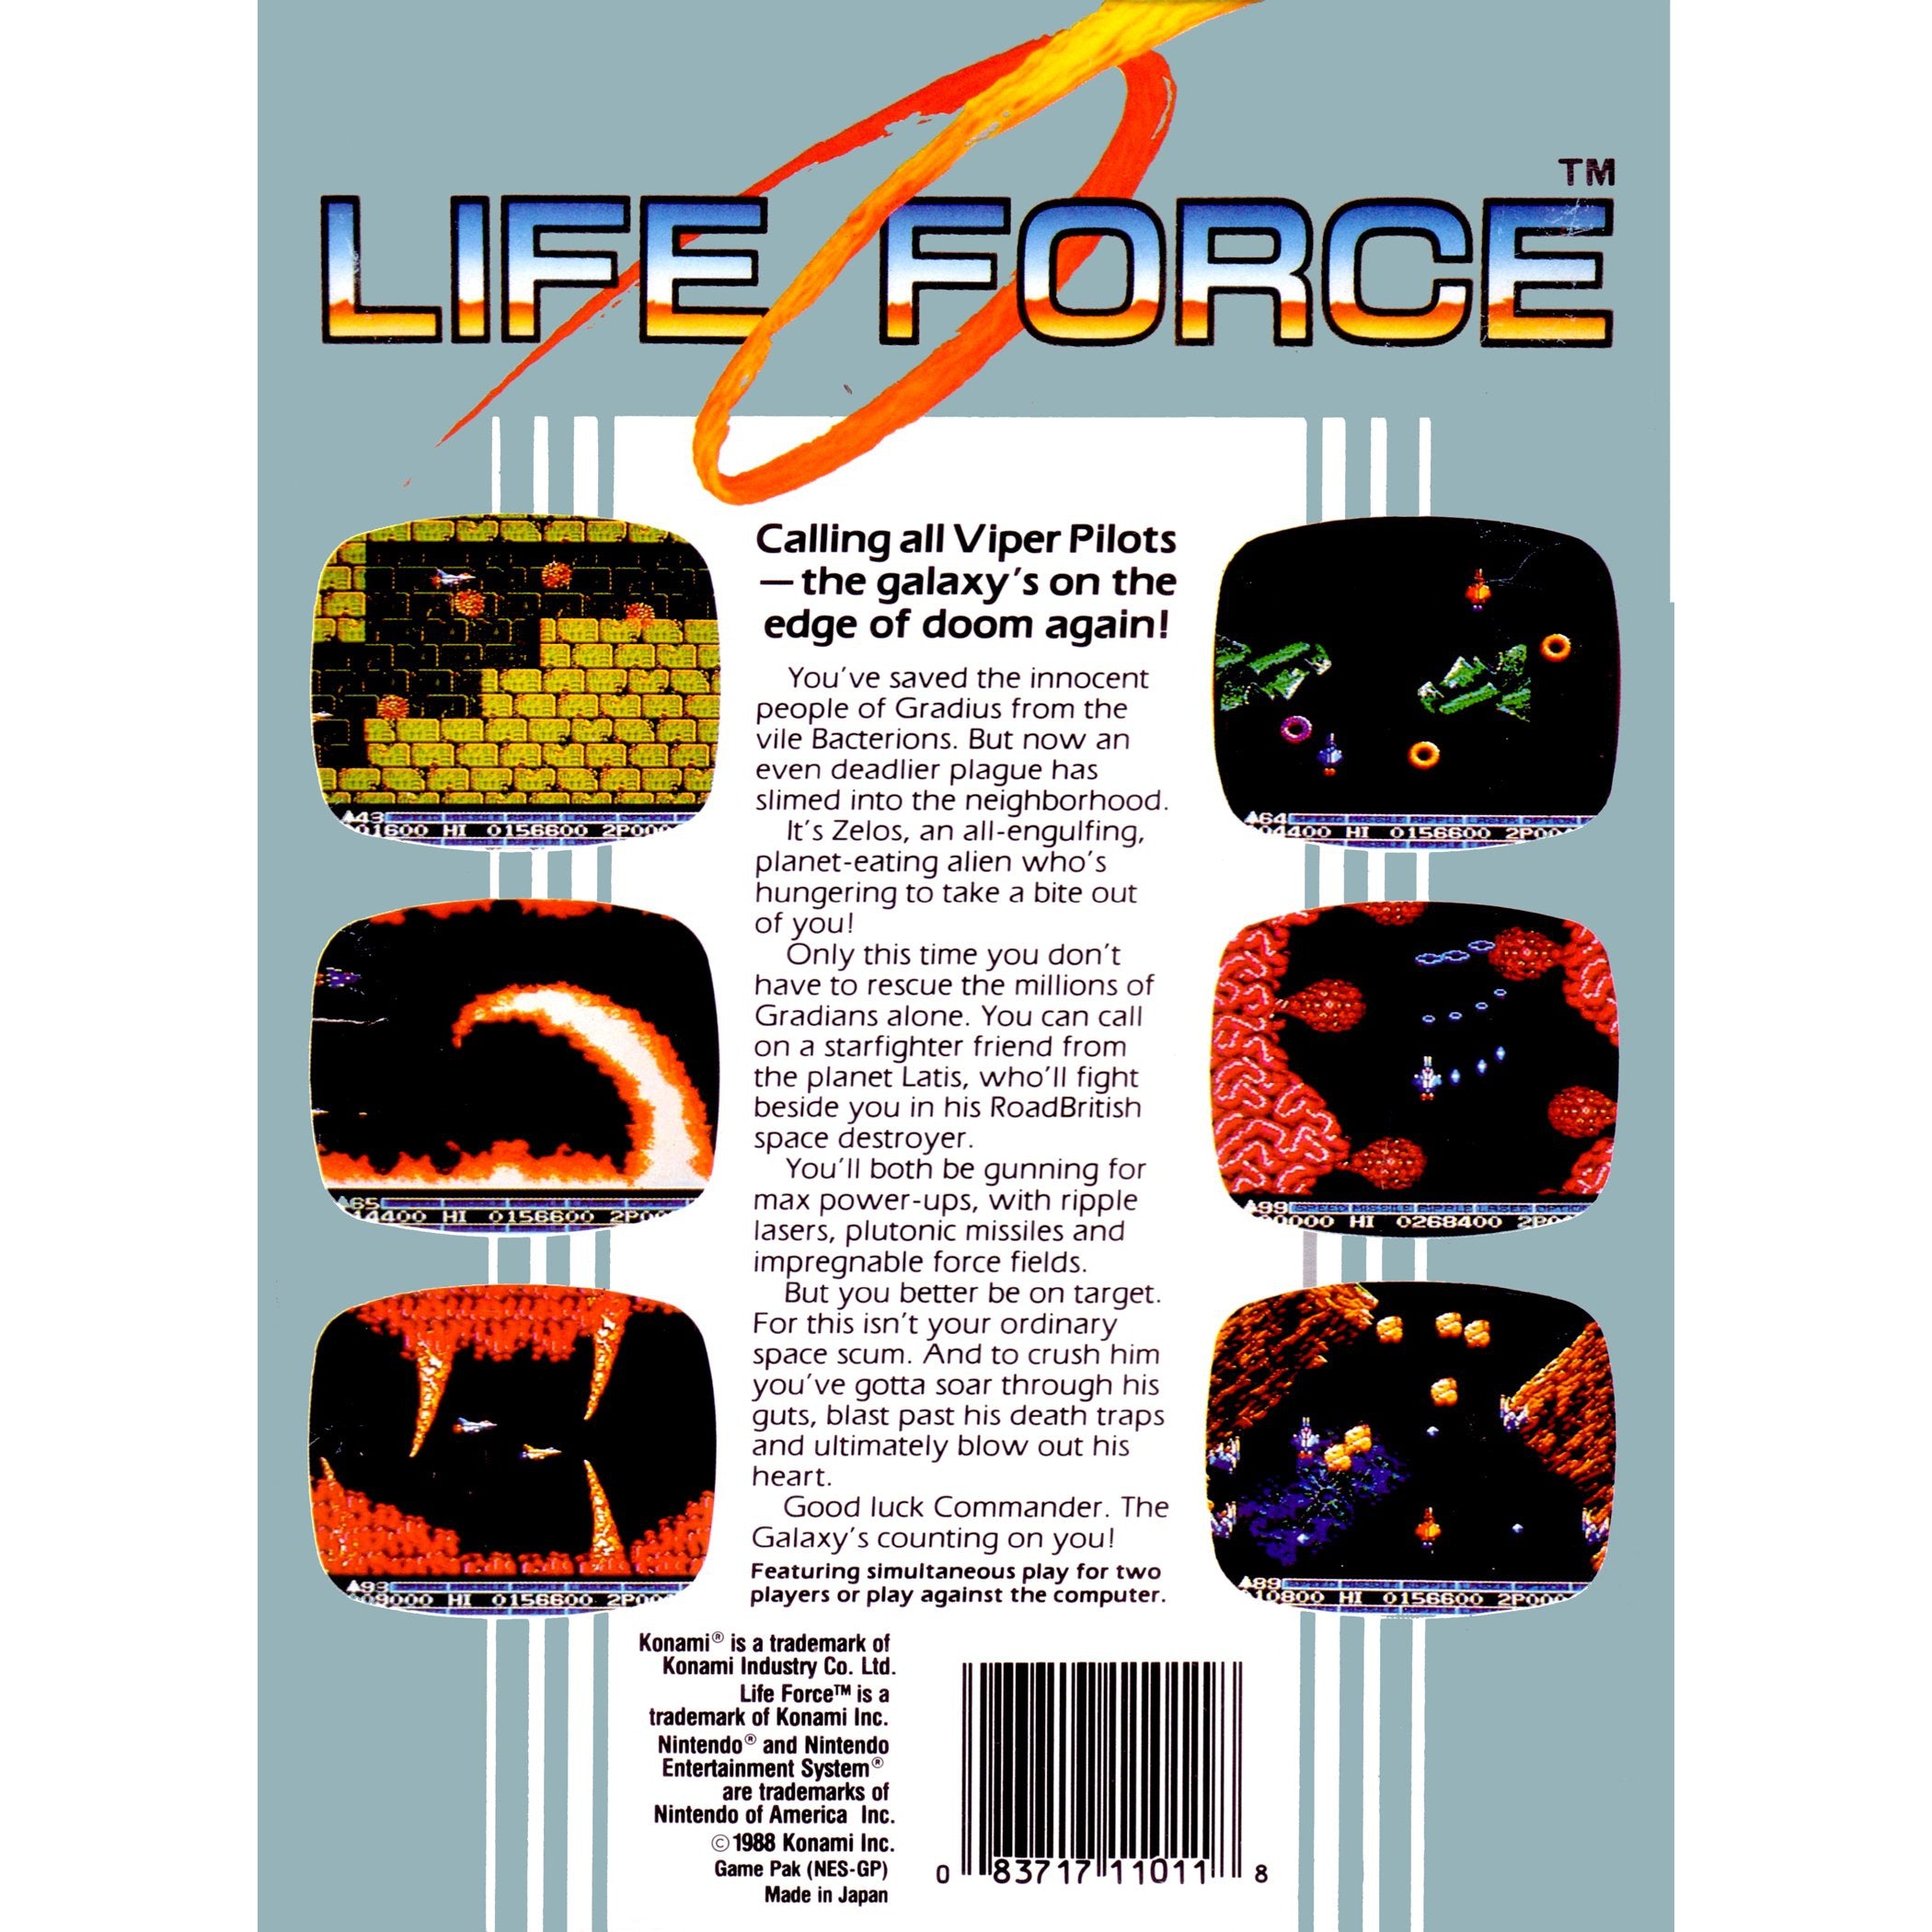 Life Force - Authentic NES Game Cartridge - YourGamingShop.com - Buy, Sell, Trade Video Games Online. 120 Day Warranty. Satisfaction Guaranteed.